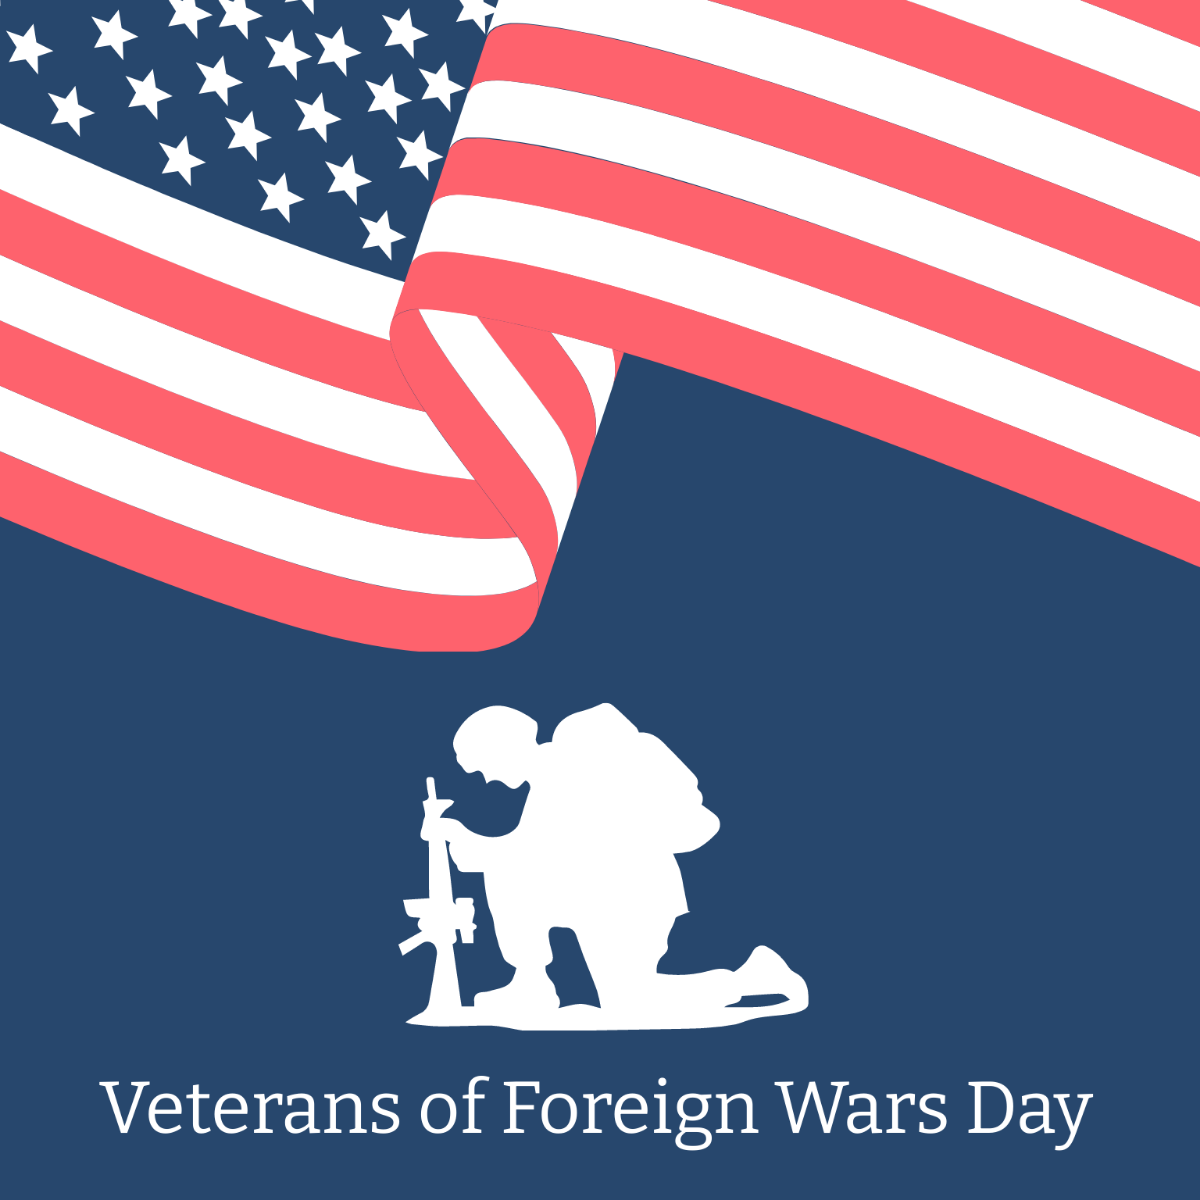 VFW Day Illustration Template